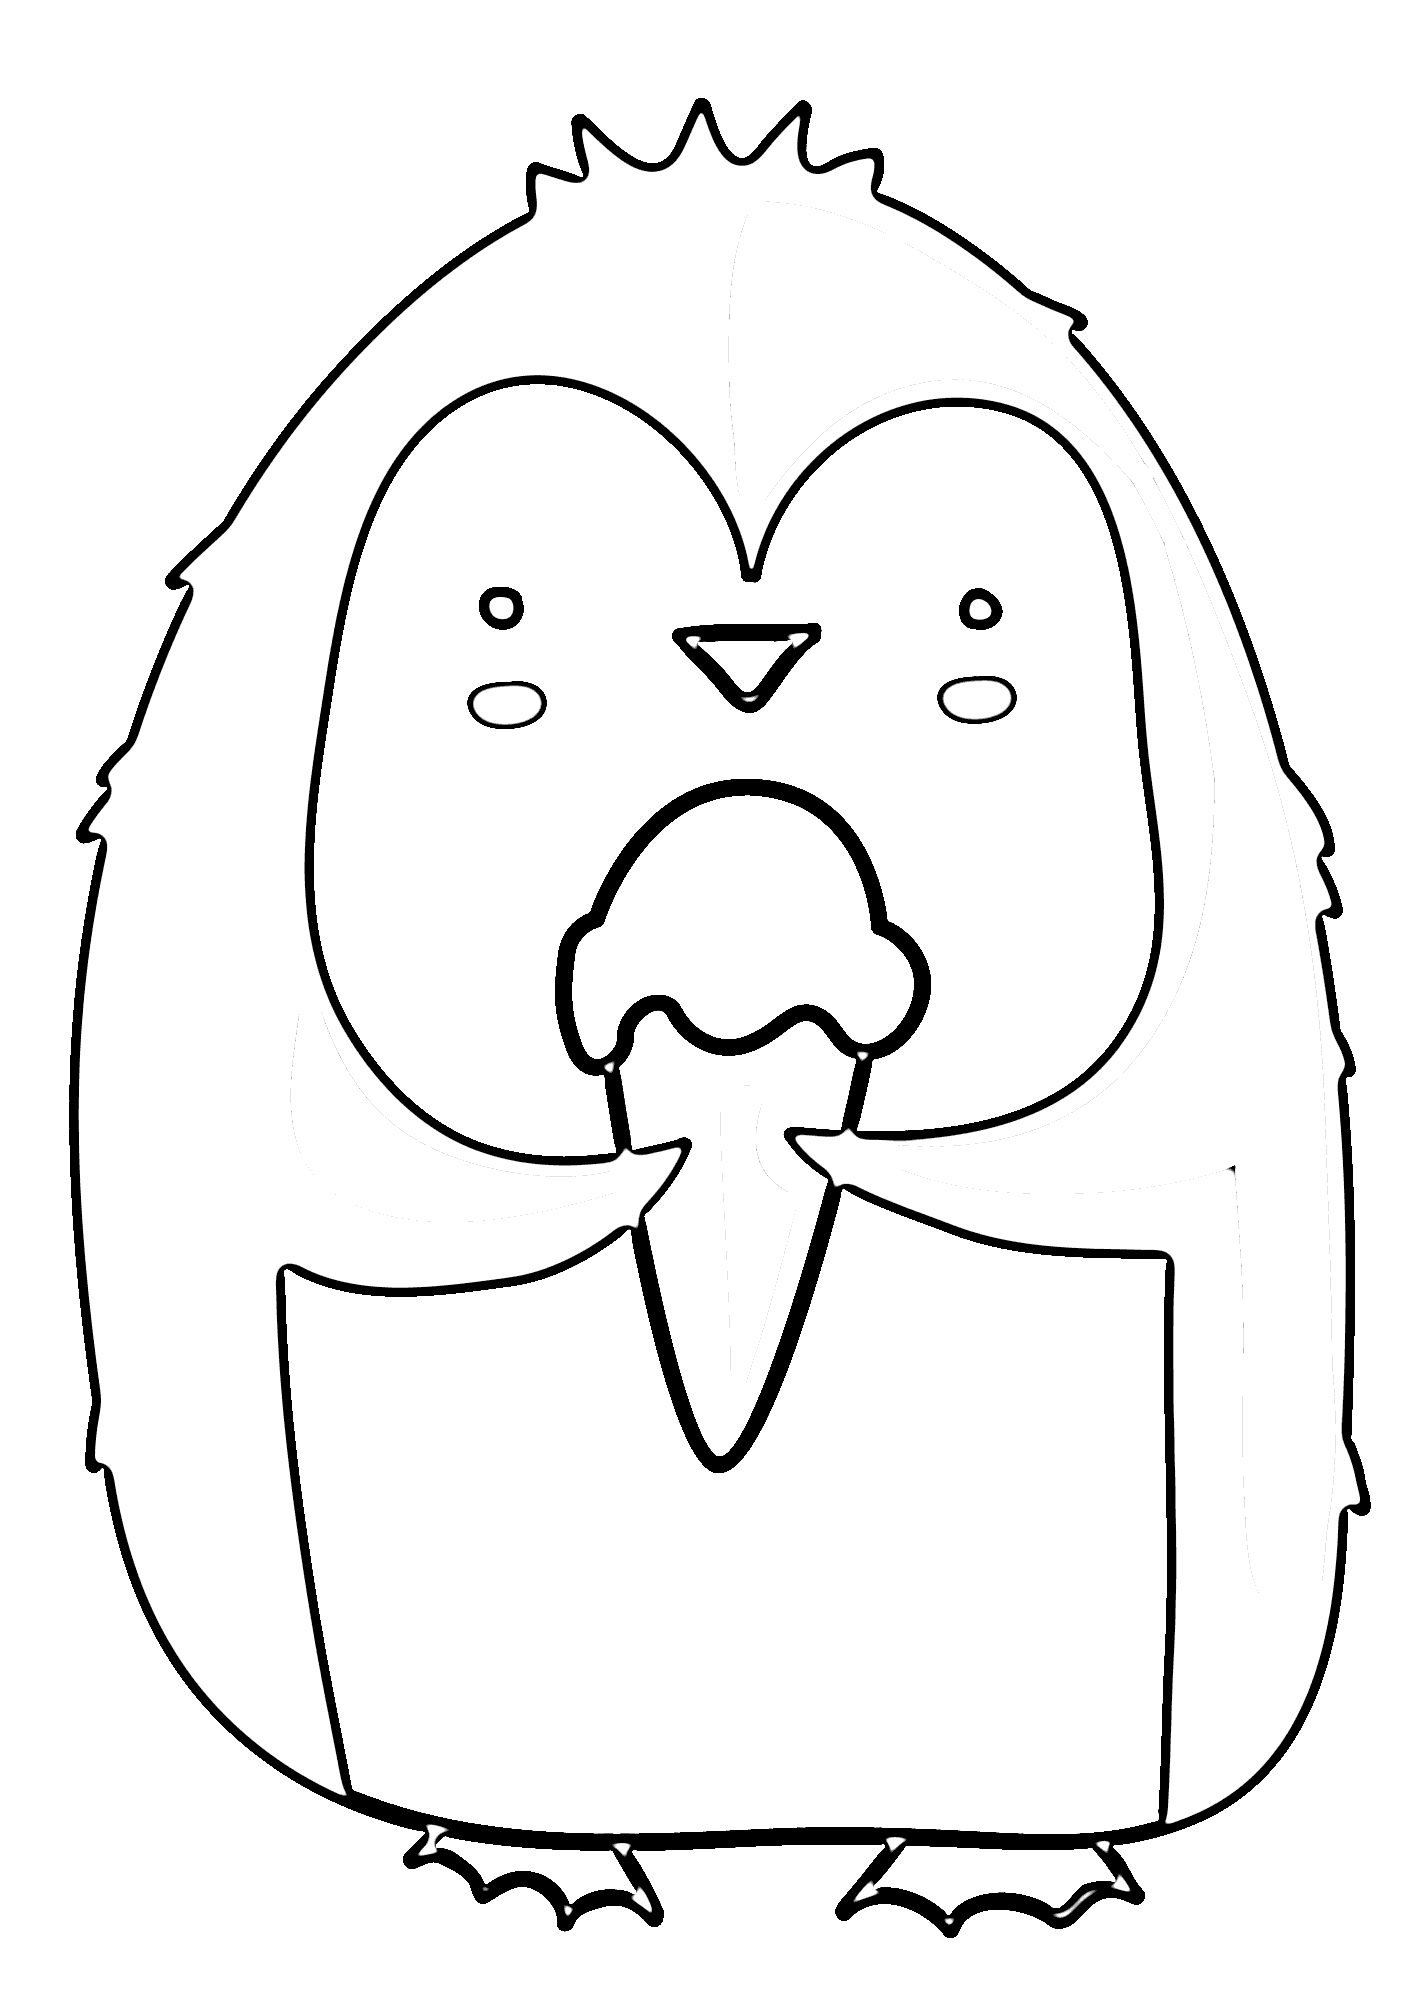 Penguin With Ice Cream Coloring Page